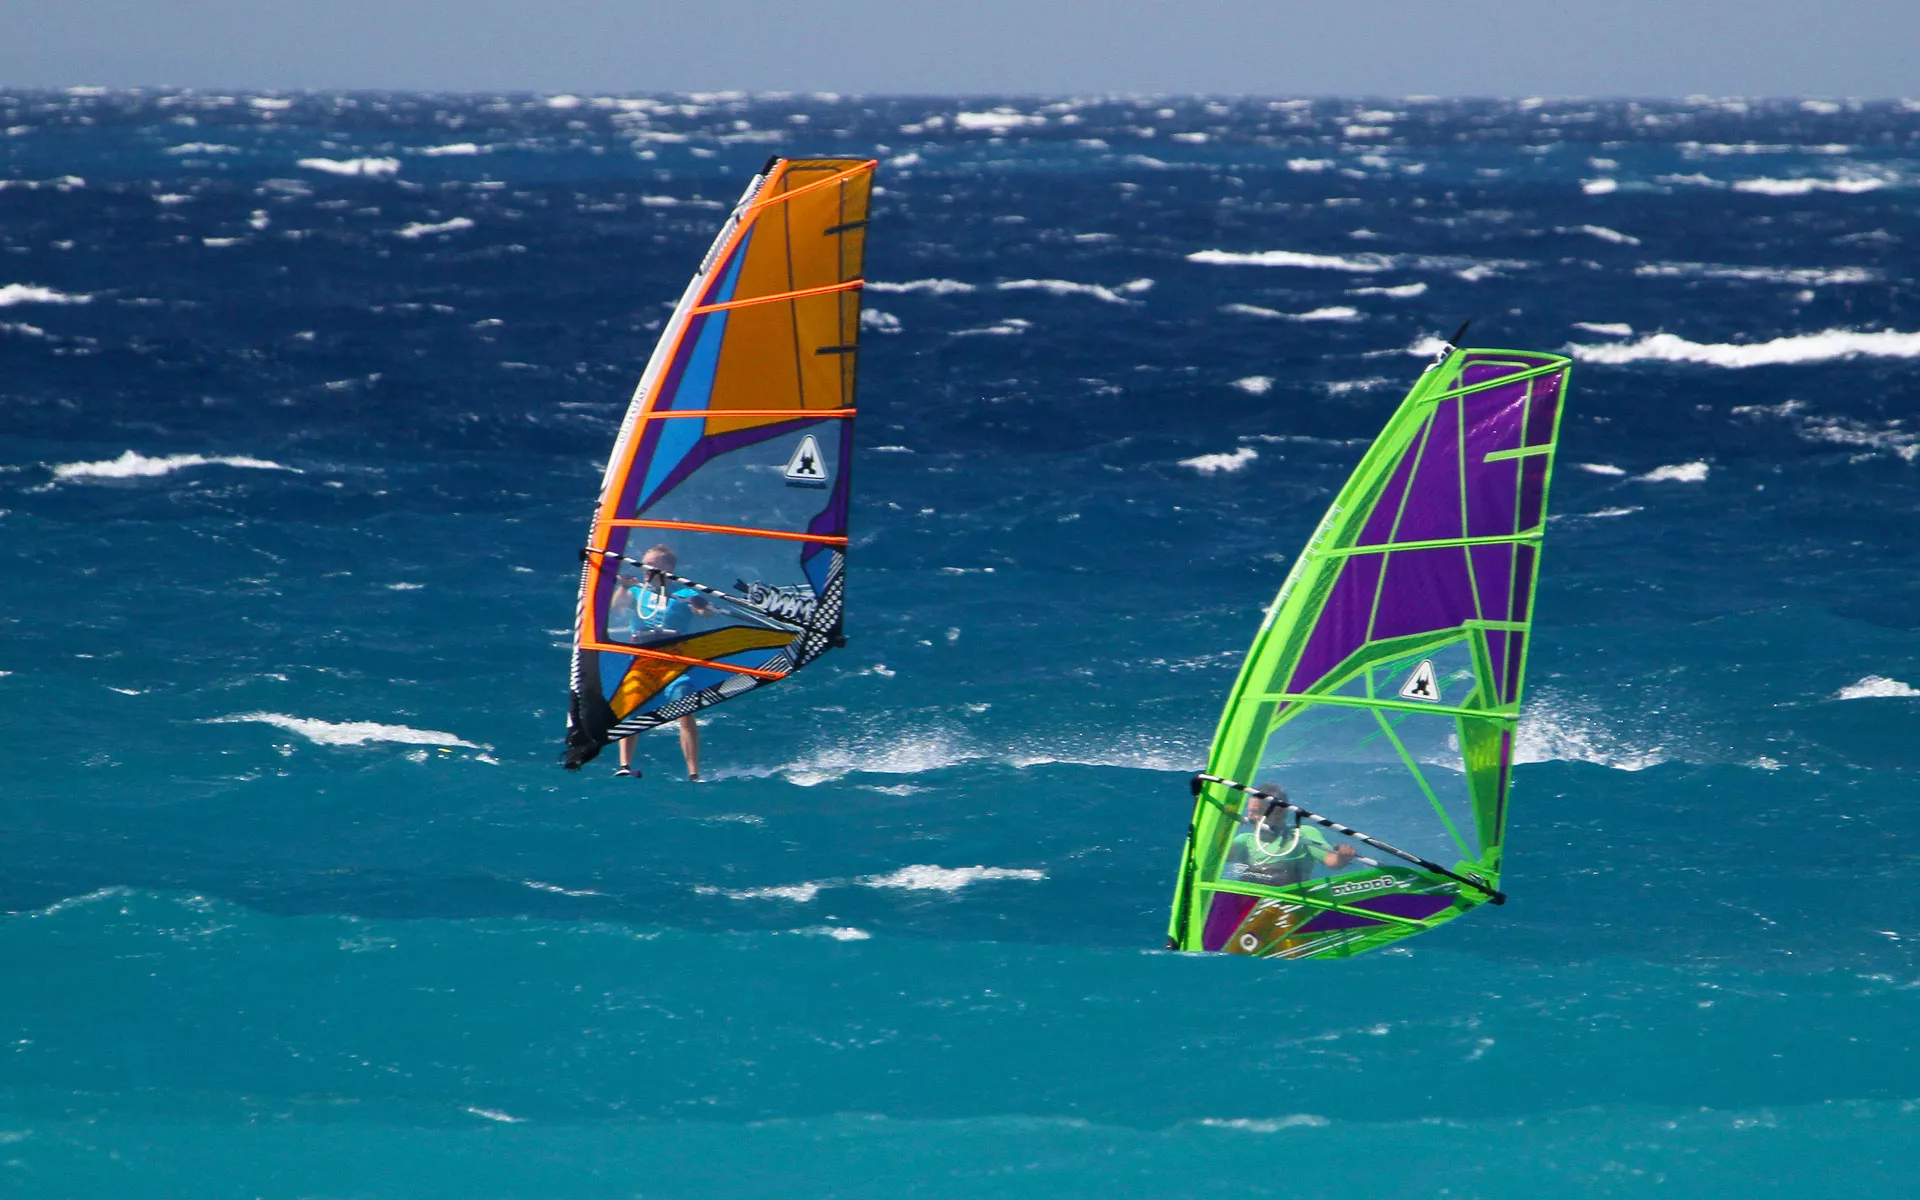 Rautio Sports in Finland, Europe | Windsurfing - Rated 0.9